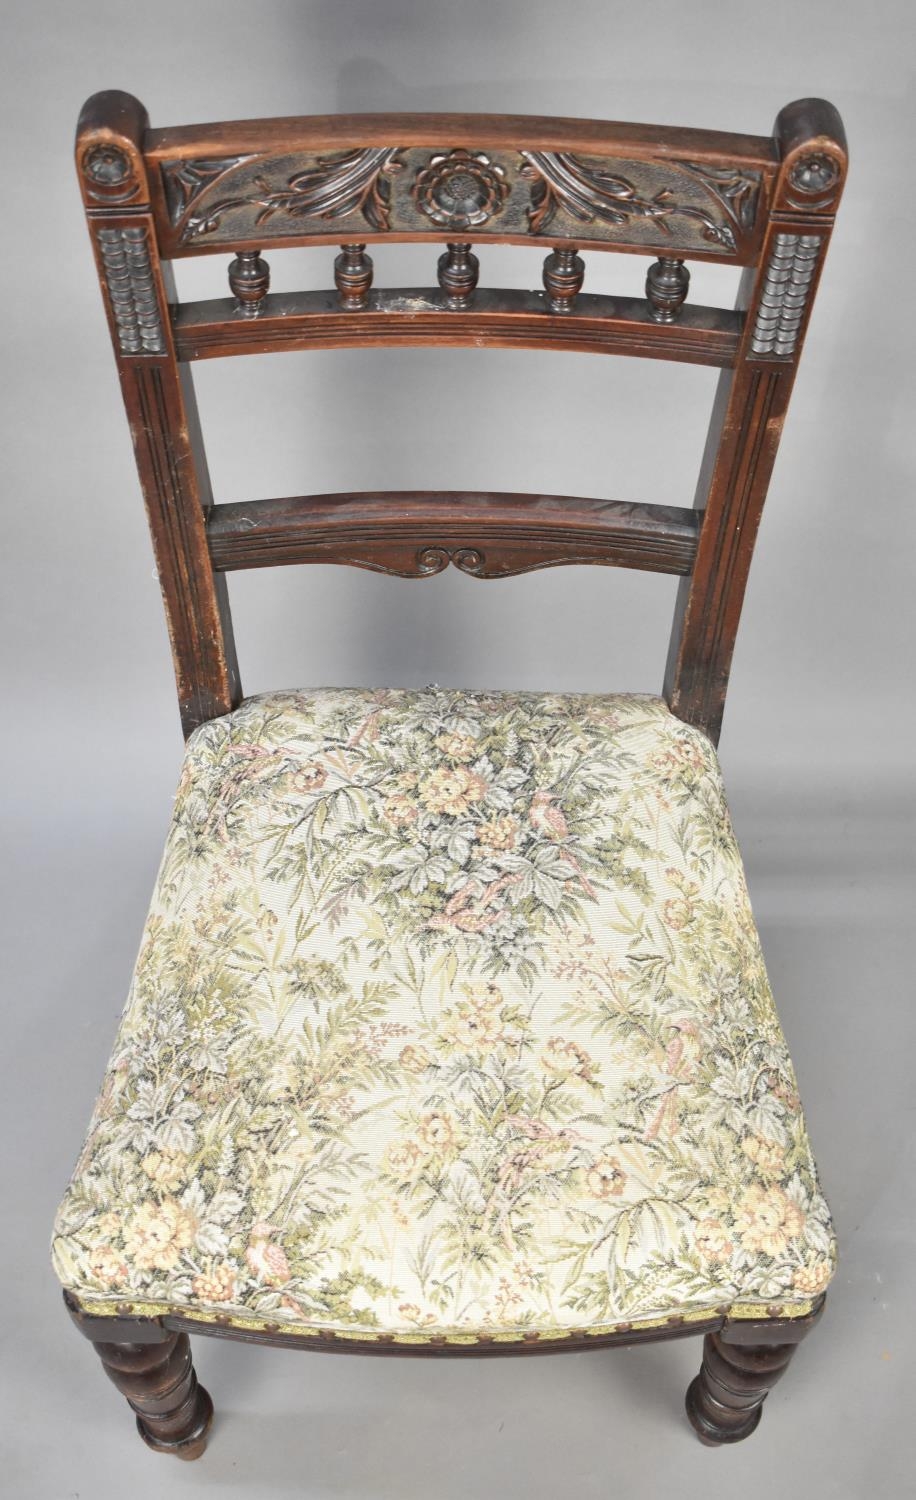 An Edwardian Ladder Back Side Chair with Carved Top Rail - Image 2 of 2